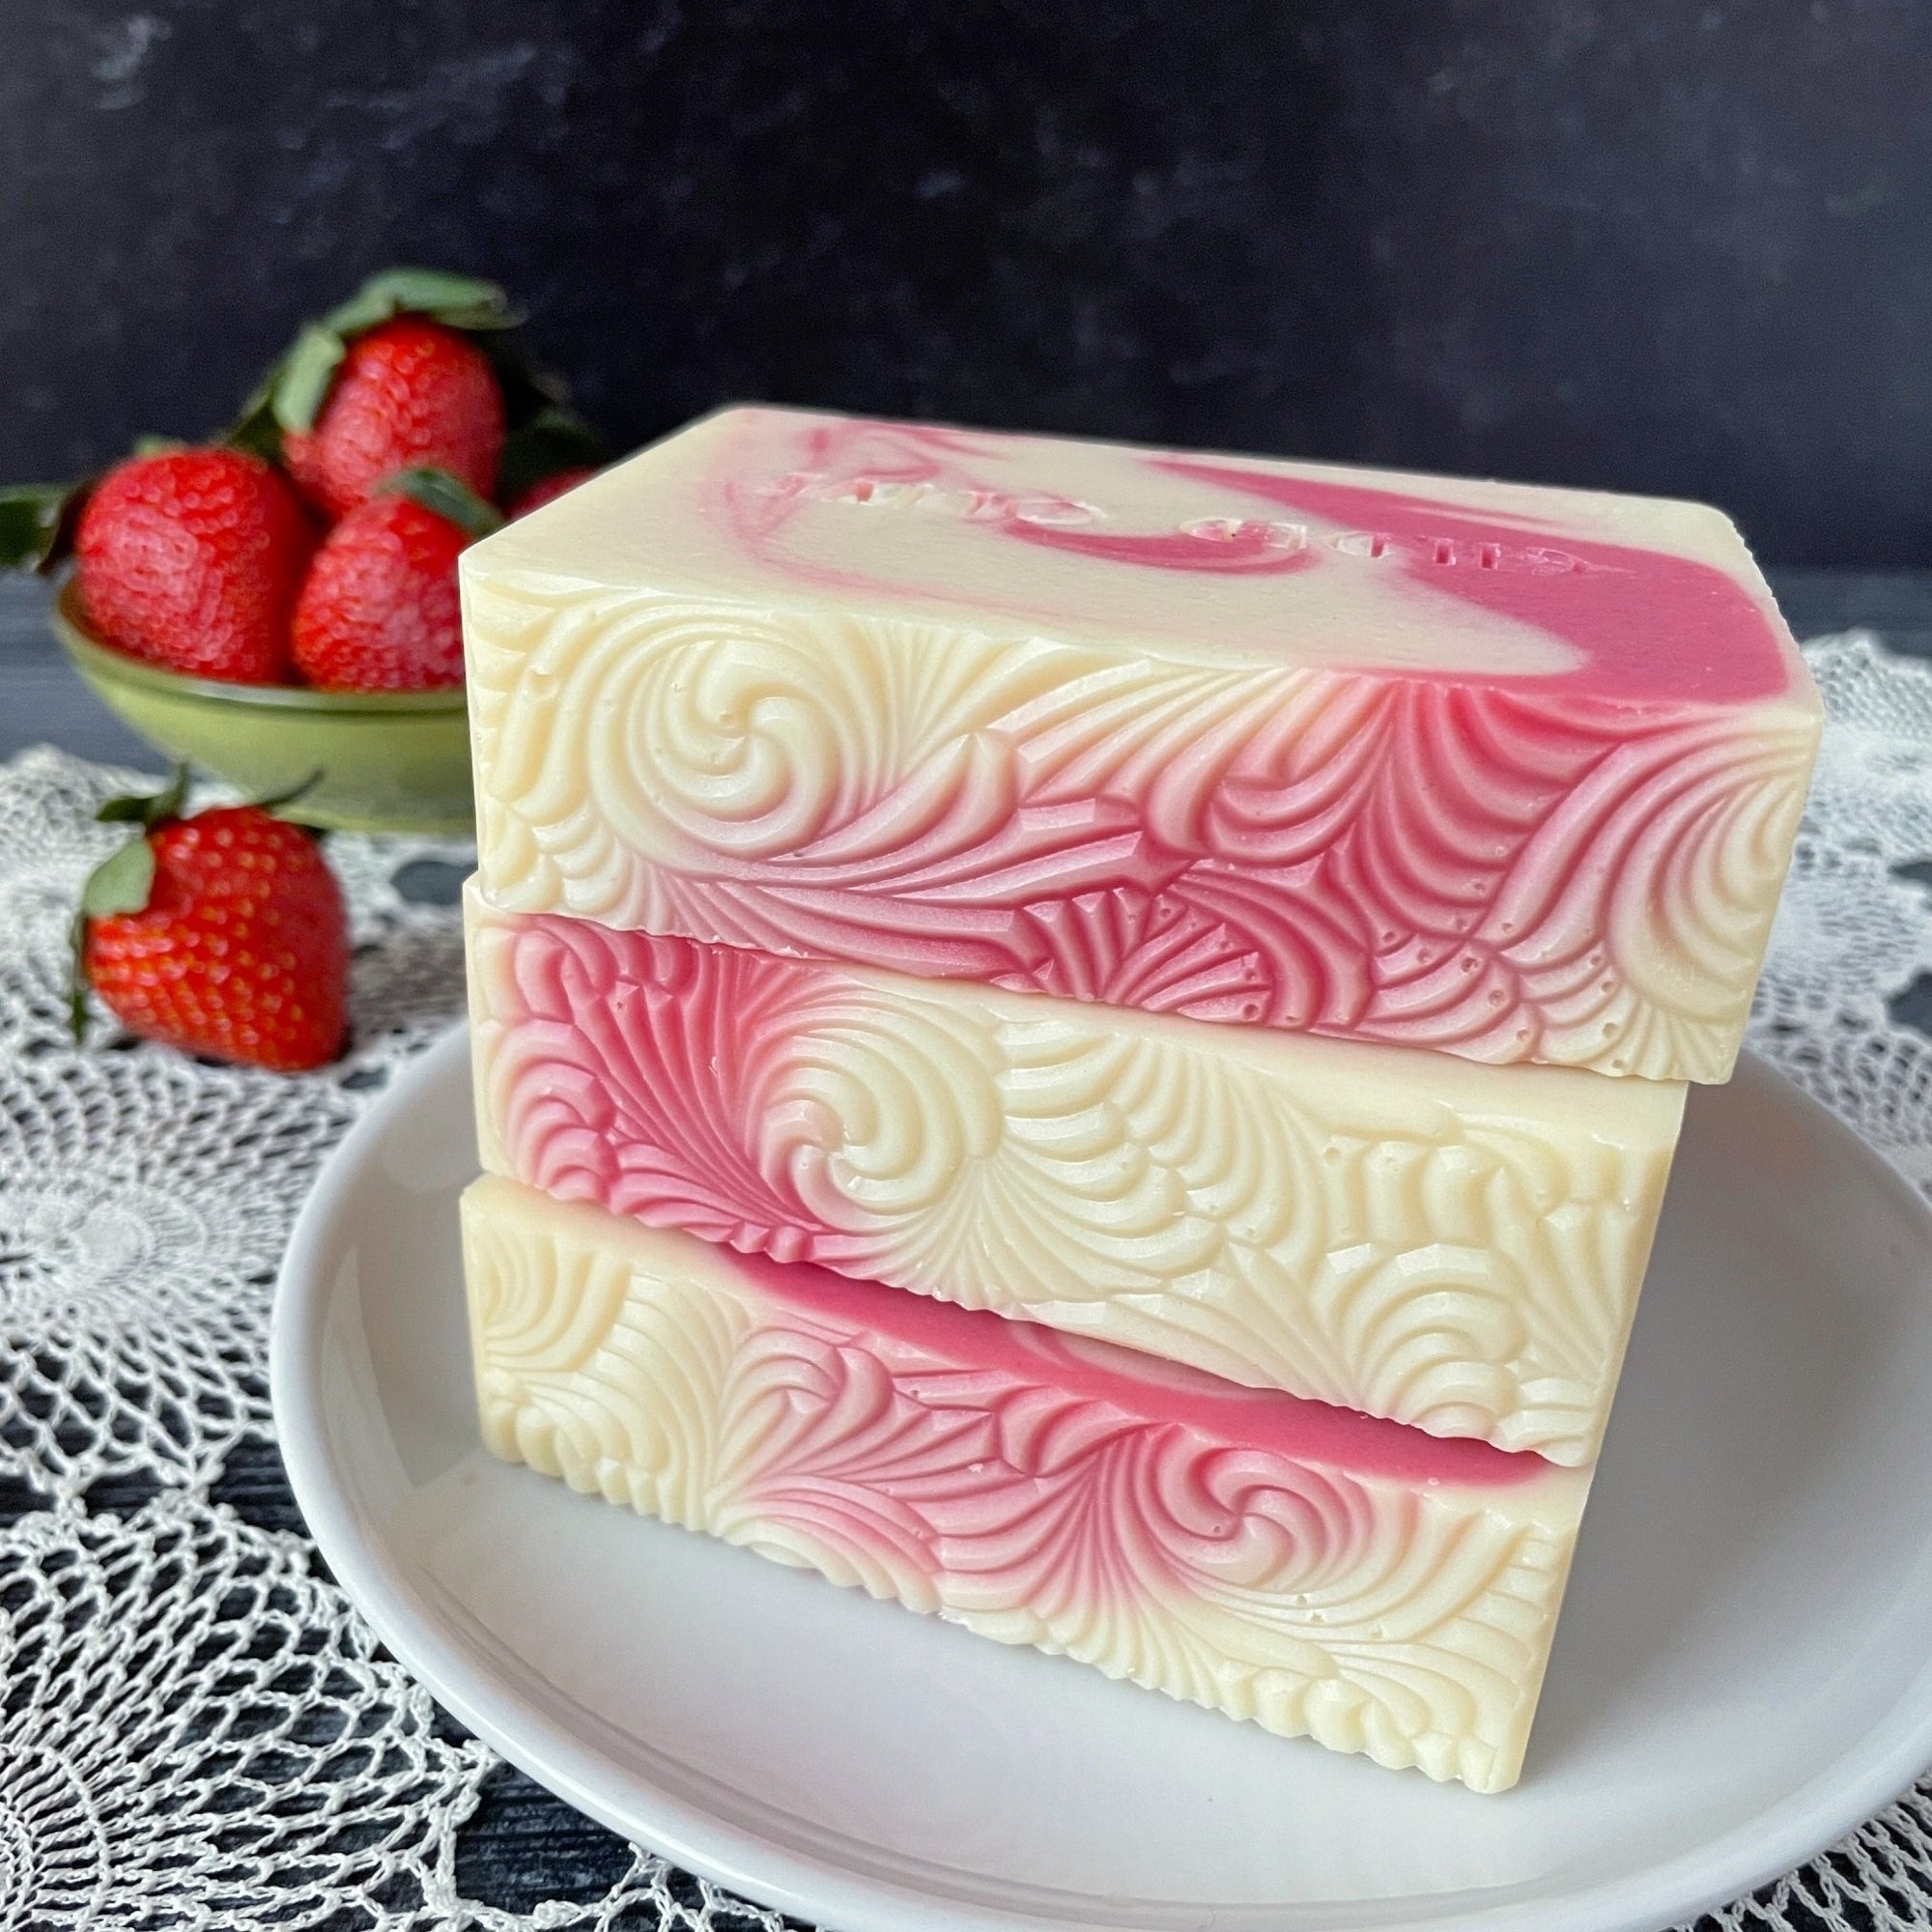 Strawberries & Cream Handmade Soap | Gilded Olive Apothecary